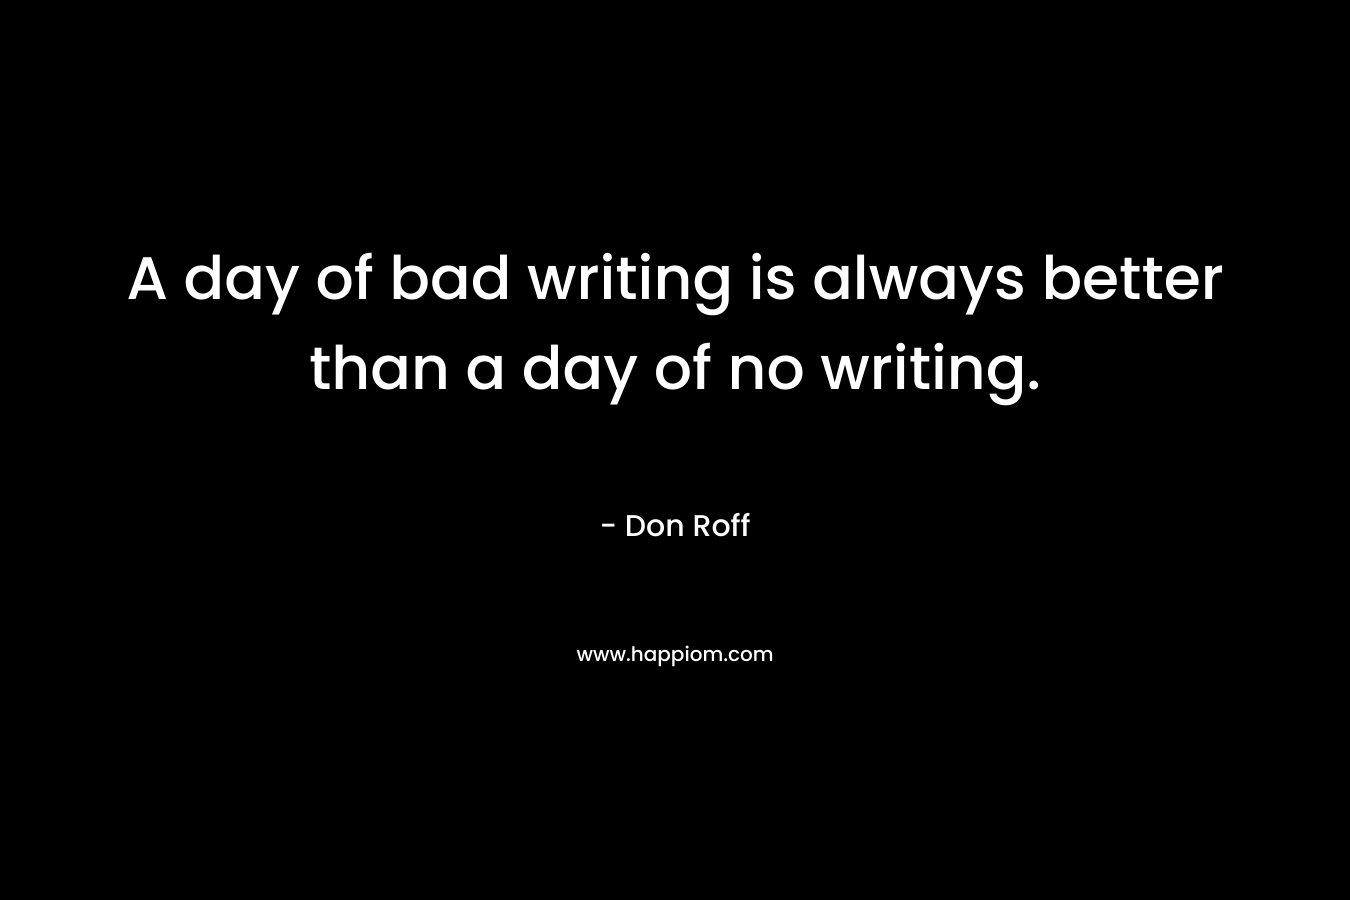 A day of bad writing is always better than a day of no writing.